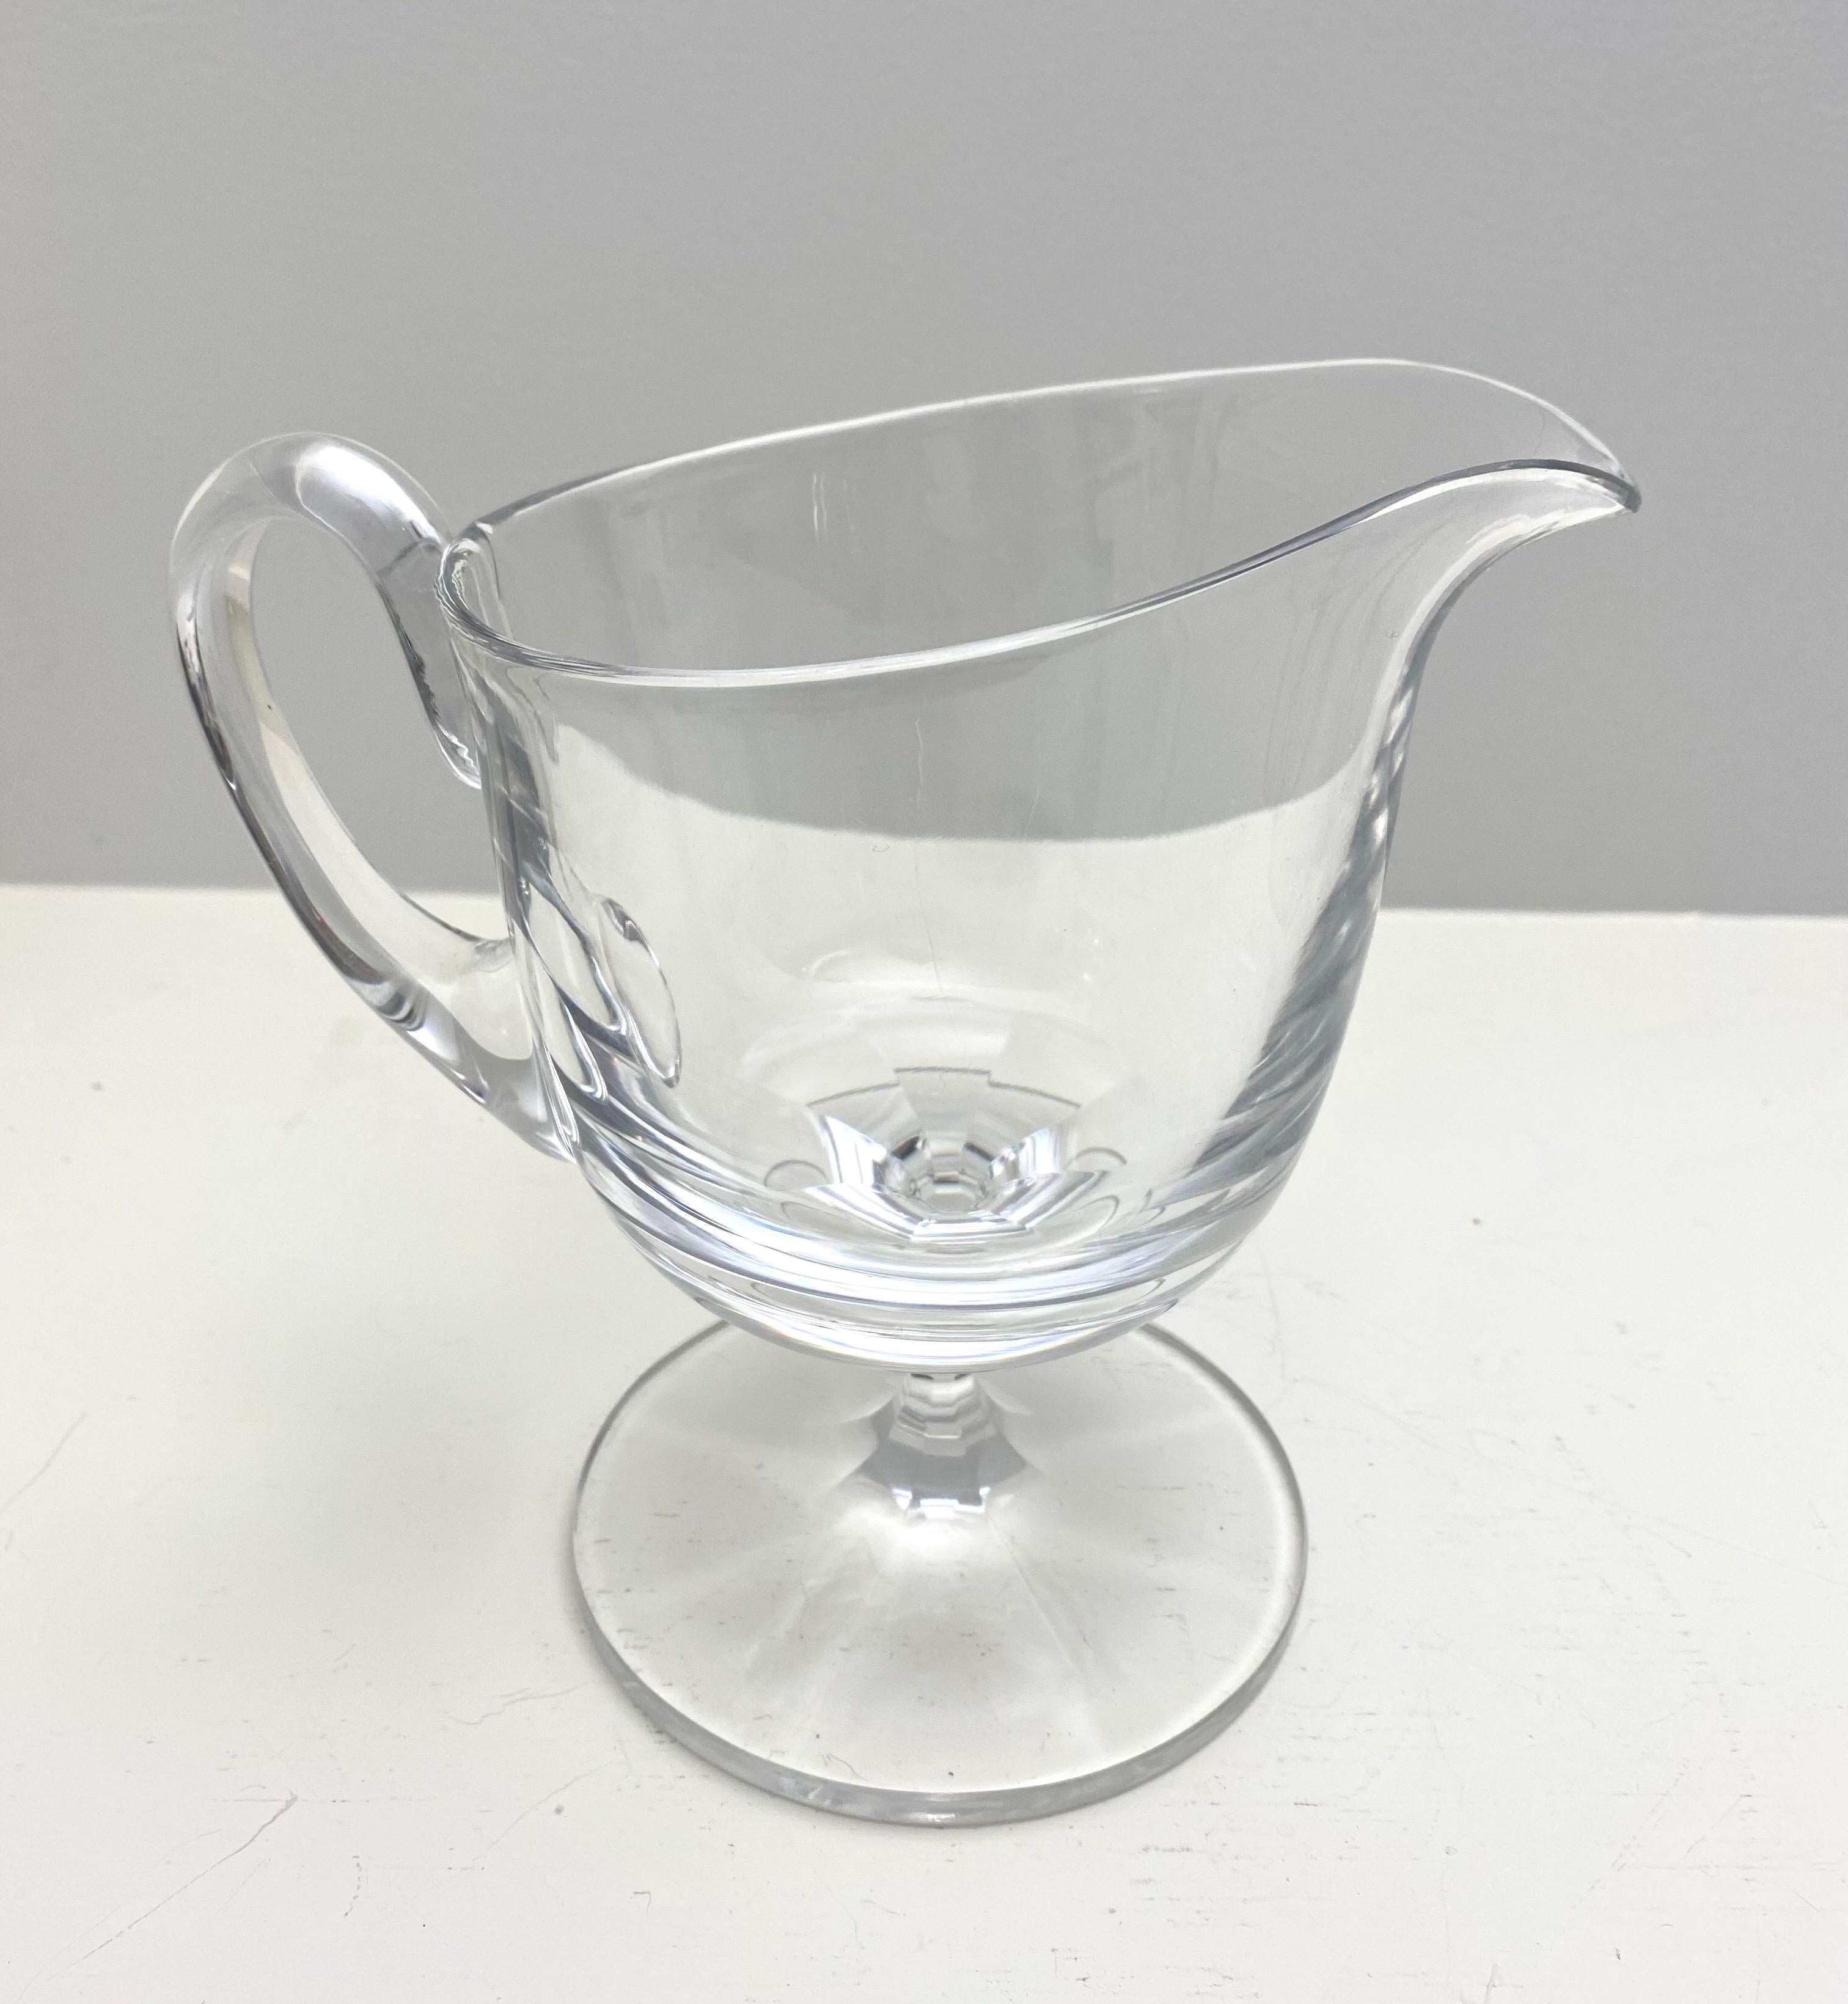 Exceptional Vintage Lalique Crystal Pitcher for Water or Cocktails for the Bar. Beautiful piece with a simple base and slightly raised triangular lines. It also has a great weight that adds to durability. Signed Laliqe France on the bottom. Great